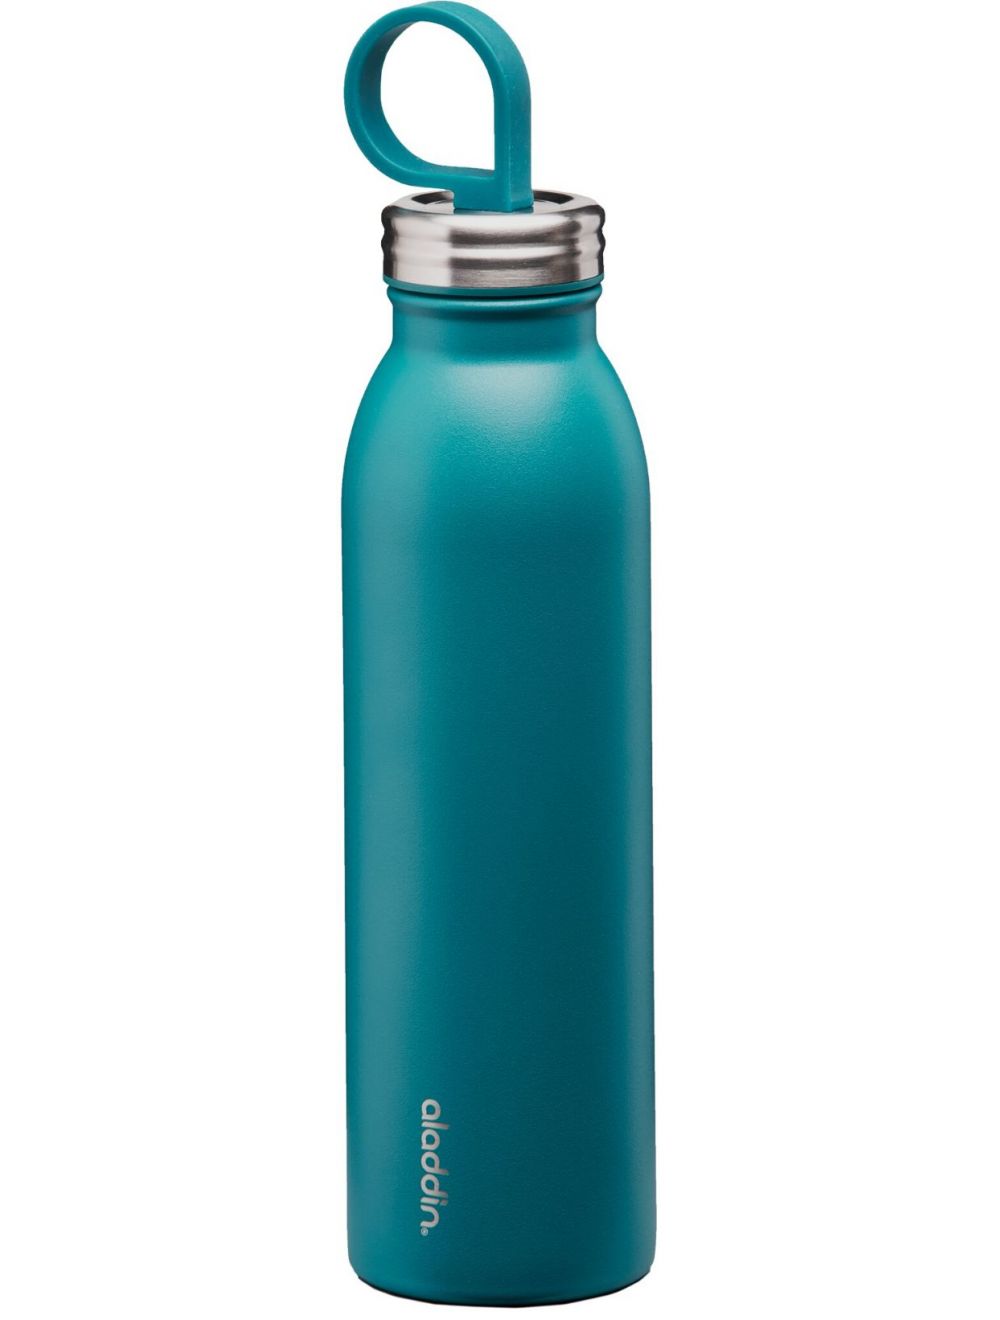 Aladdin Chilled Thermavac™ Stainless Steel Water Bottle 0.55L Aqua Blue-10-09425-004